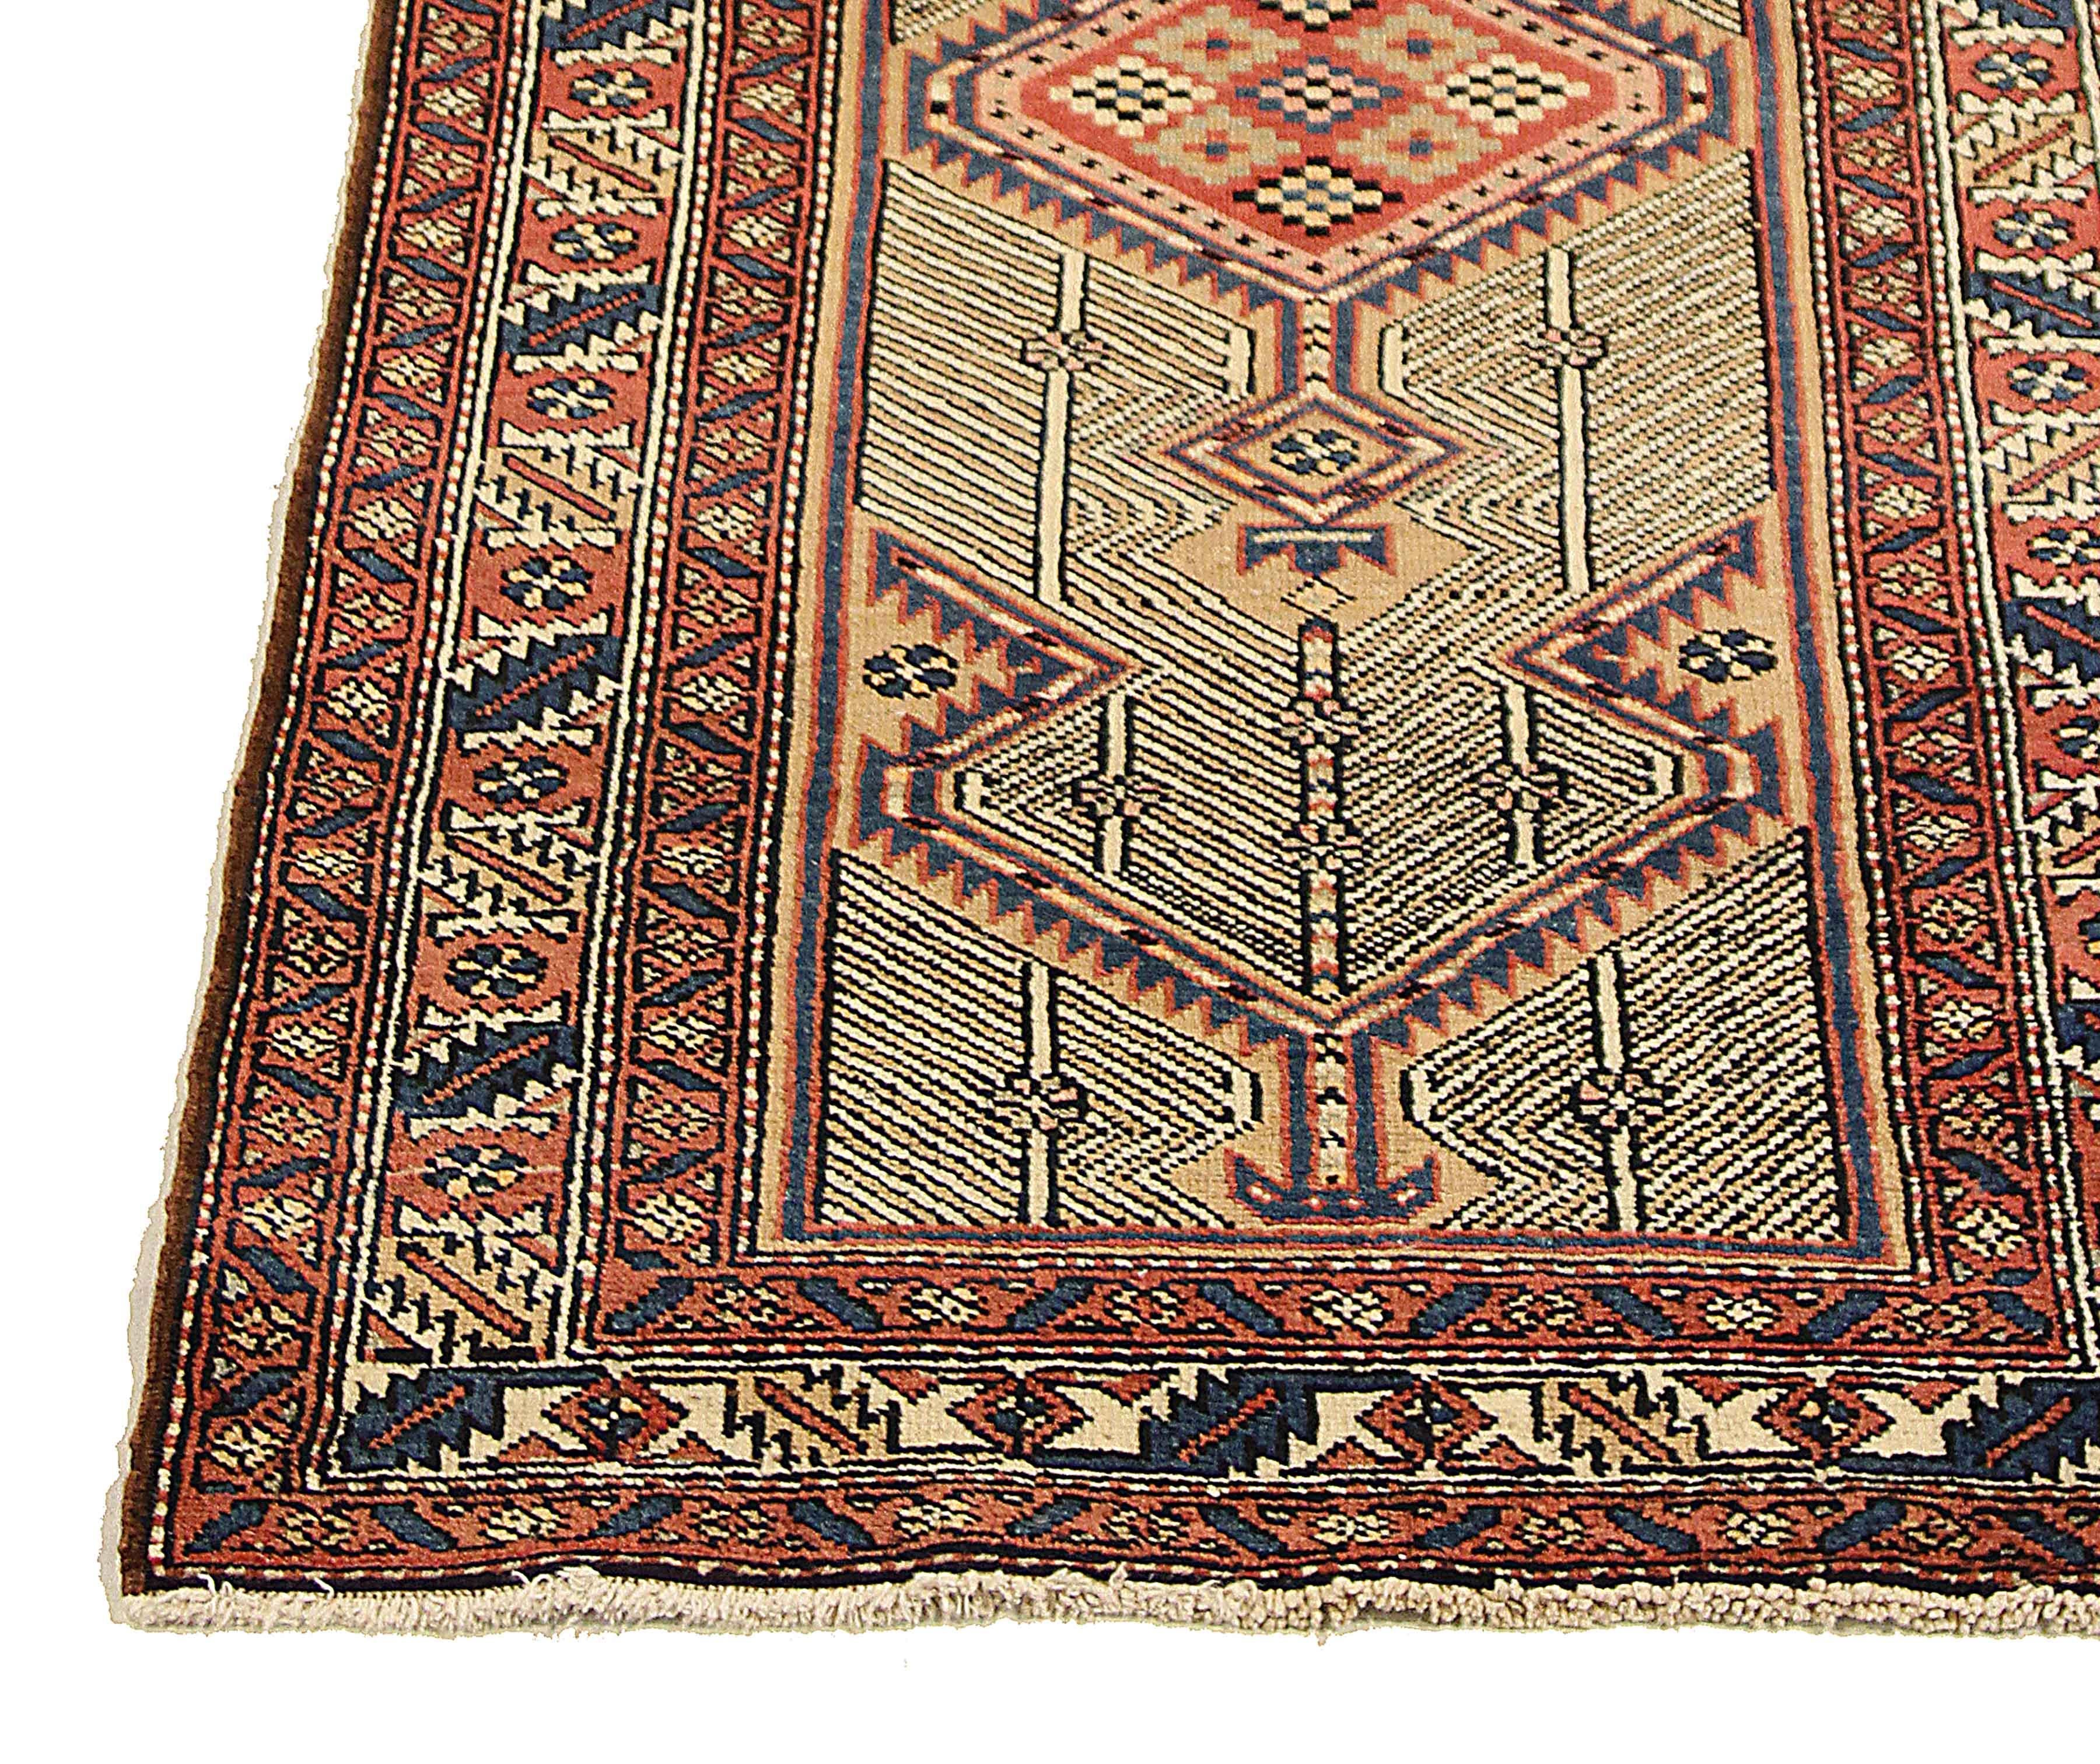 Antique Persian runner rug handwoven from the finest sheep’s wool and colored with all-natural vegetable dyes that are safe for humans and pets. It’s a traditional Sarab design featuring geometric details in blue and red over a mixed beige and red